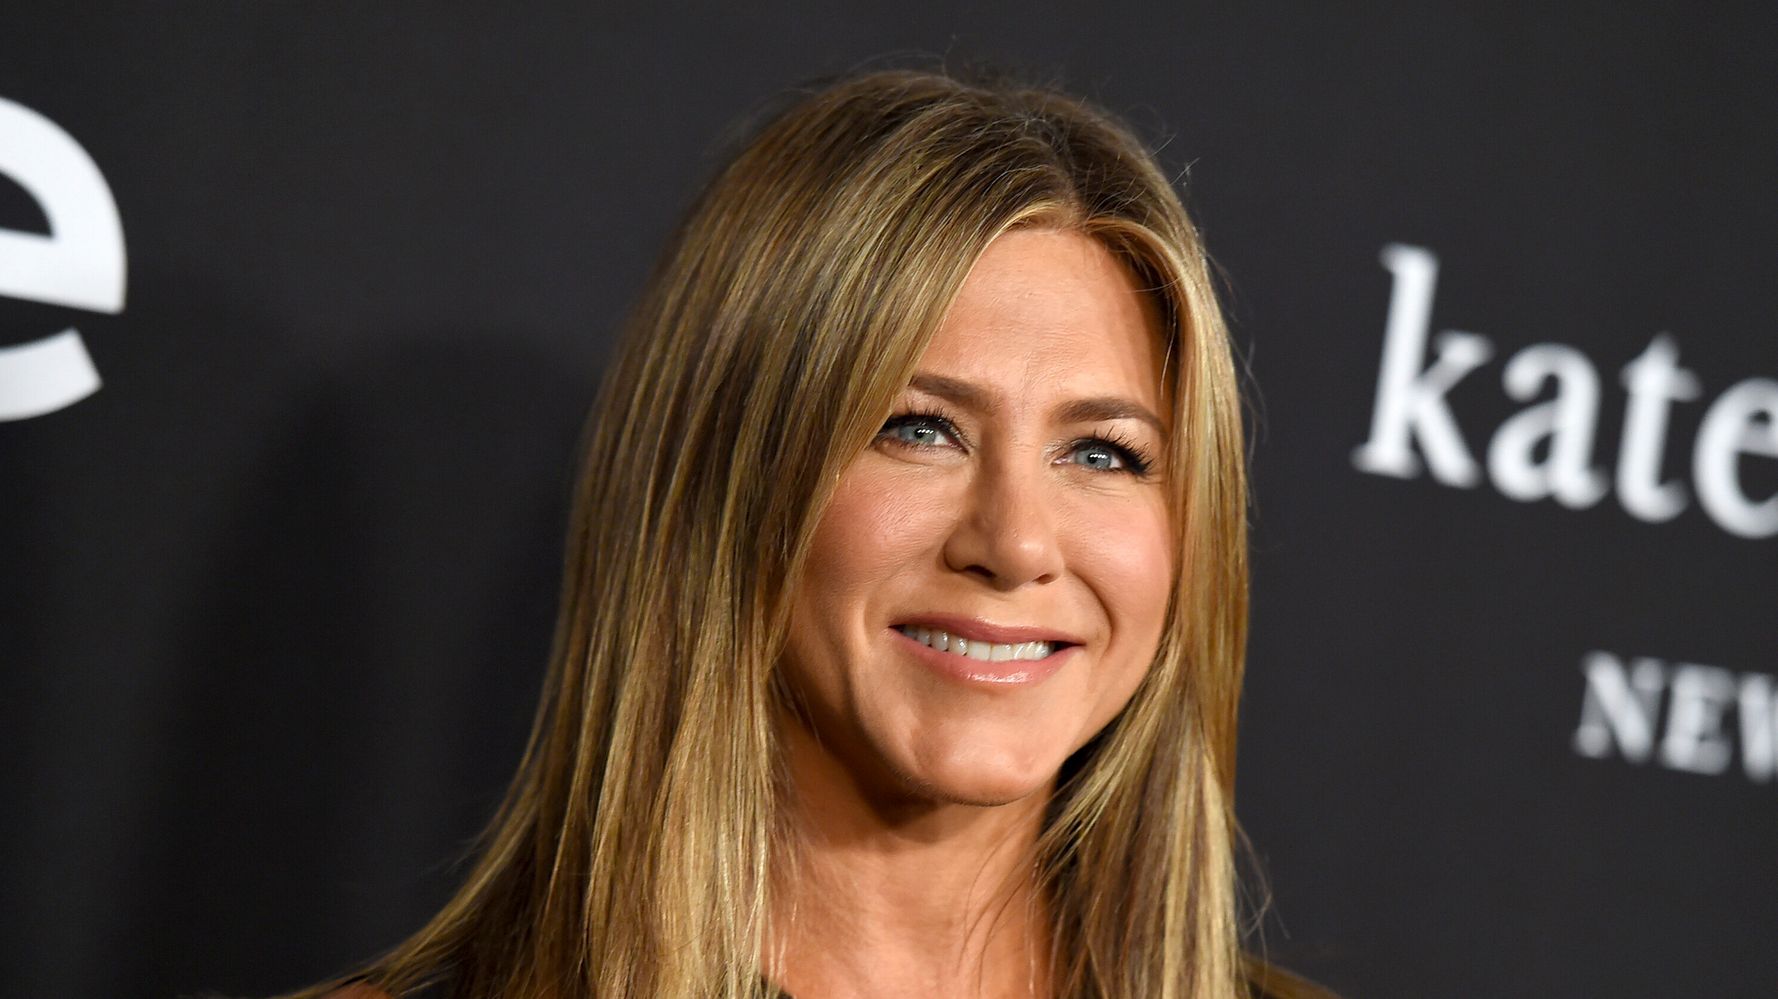 Jennifer Aniston Is Ready To Be More Than 'Friends' With The Right Guy